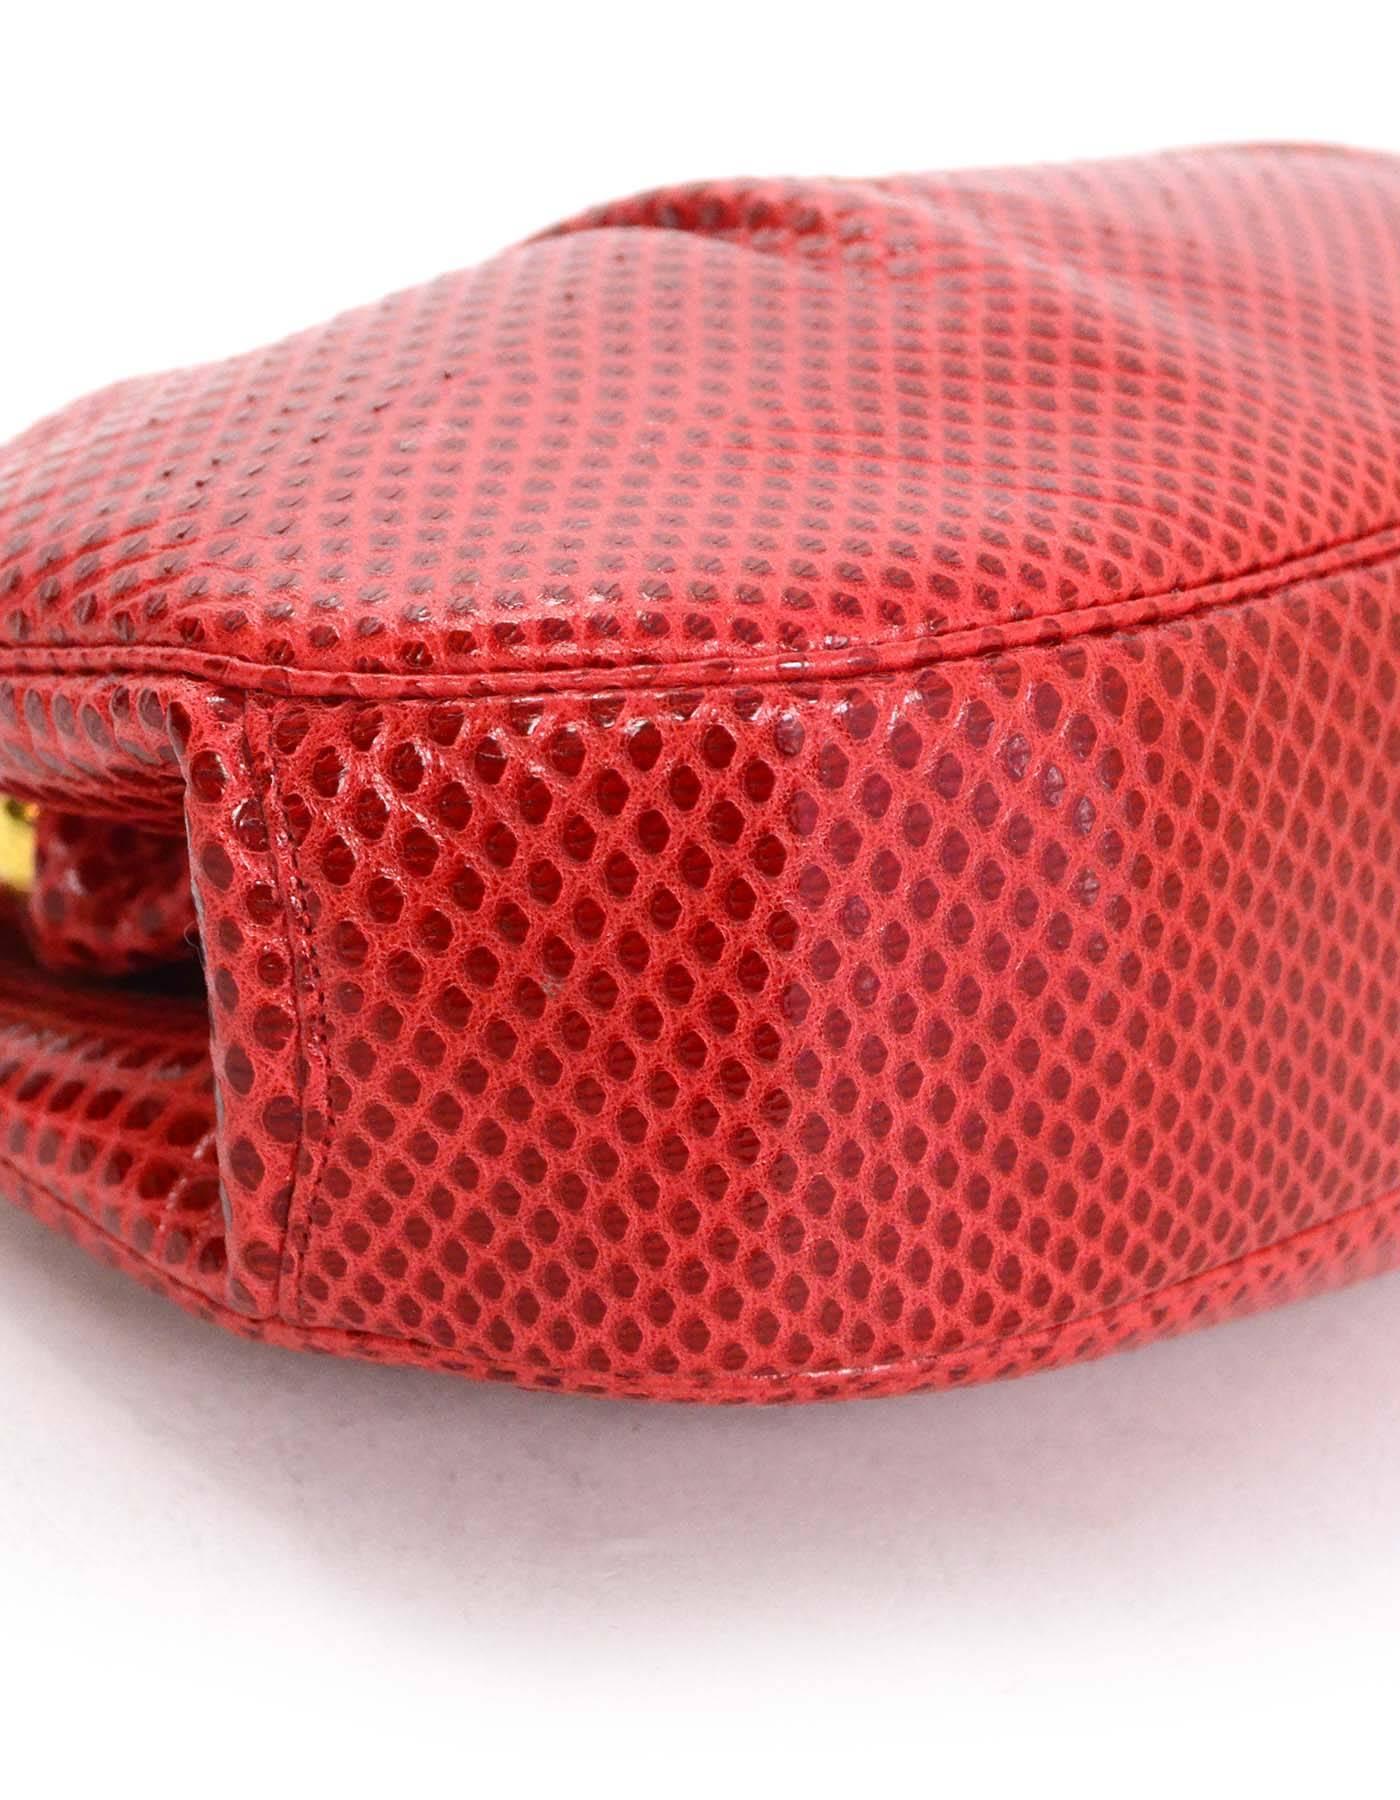 Judith Leiber Red Karung Snakeskin Clutch with GHW 2